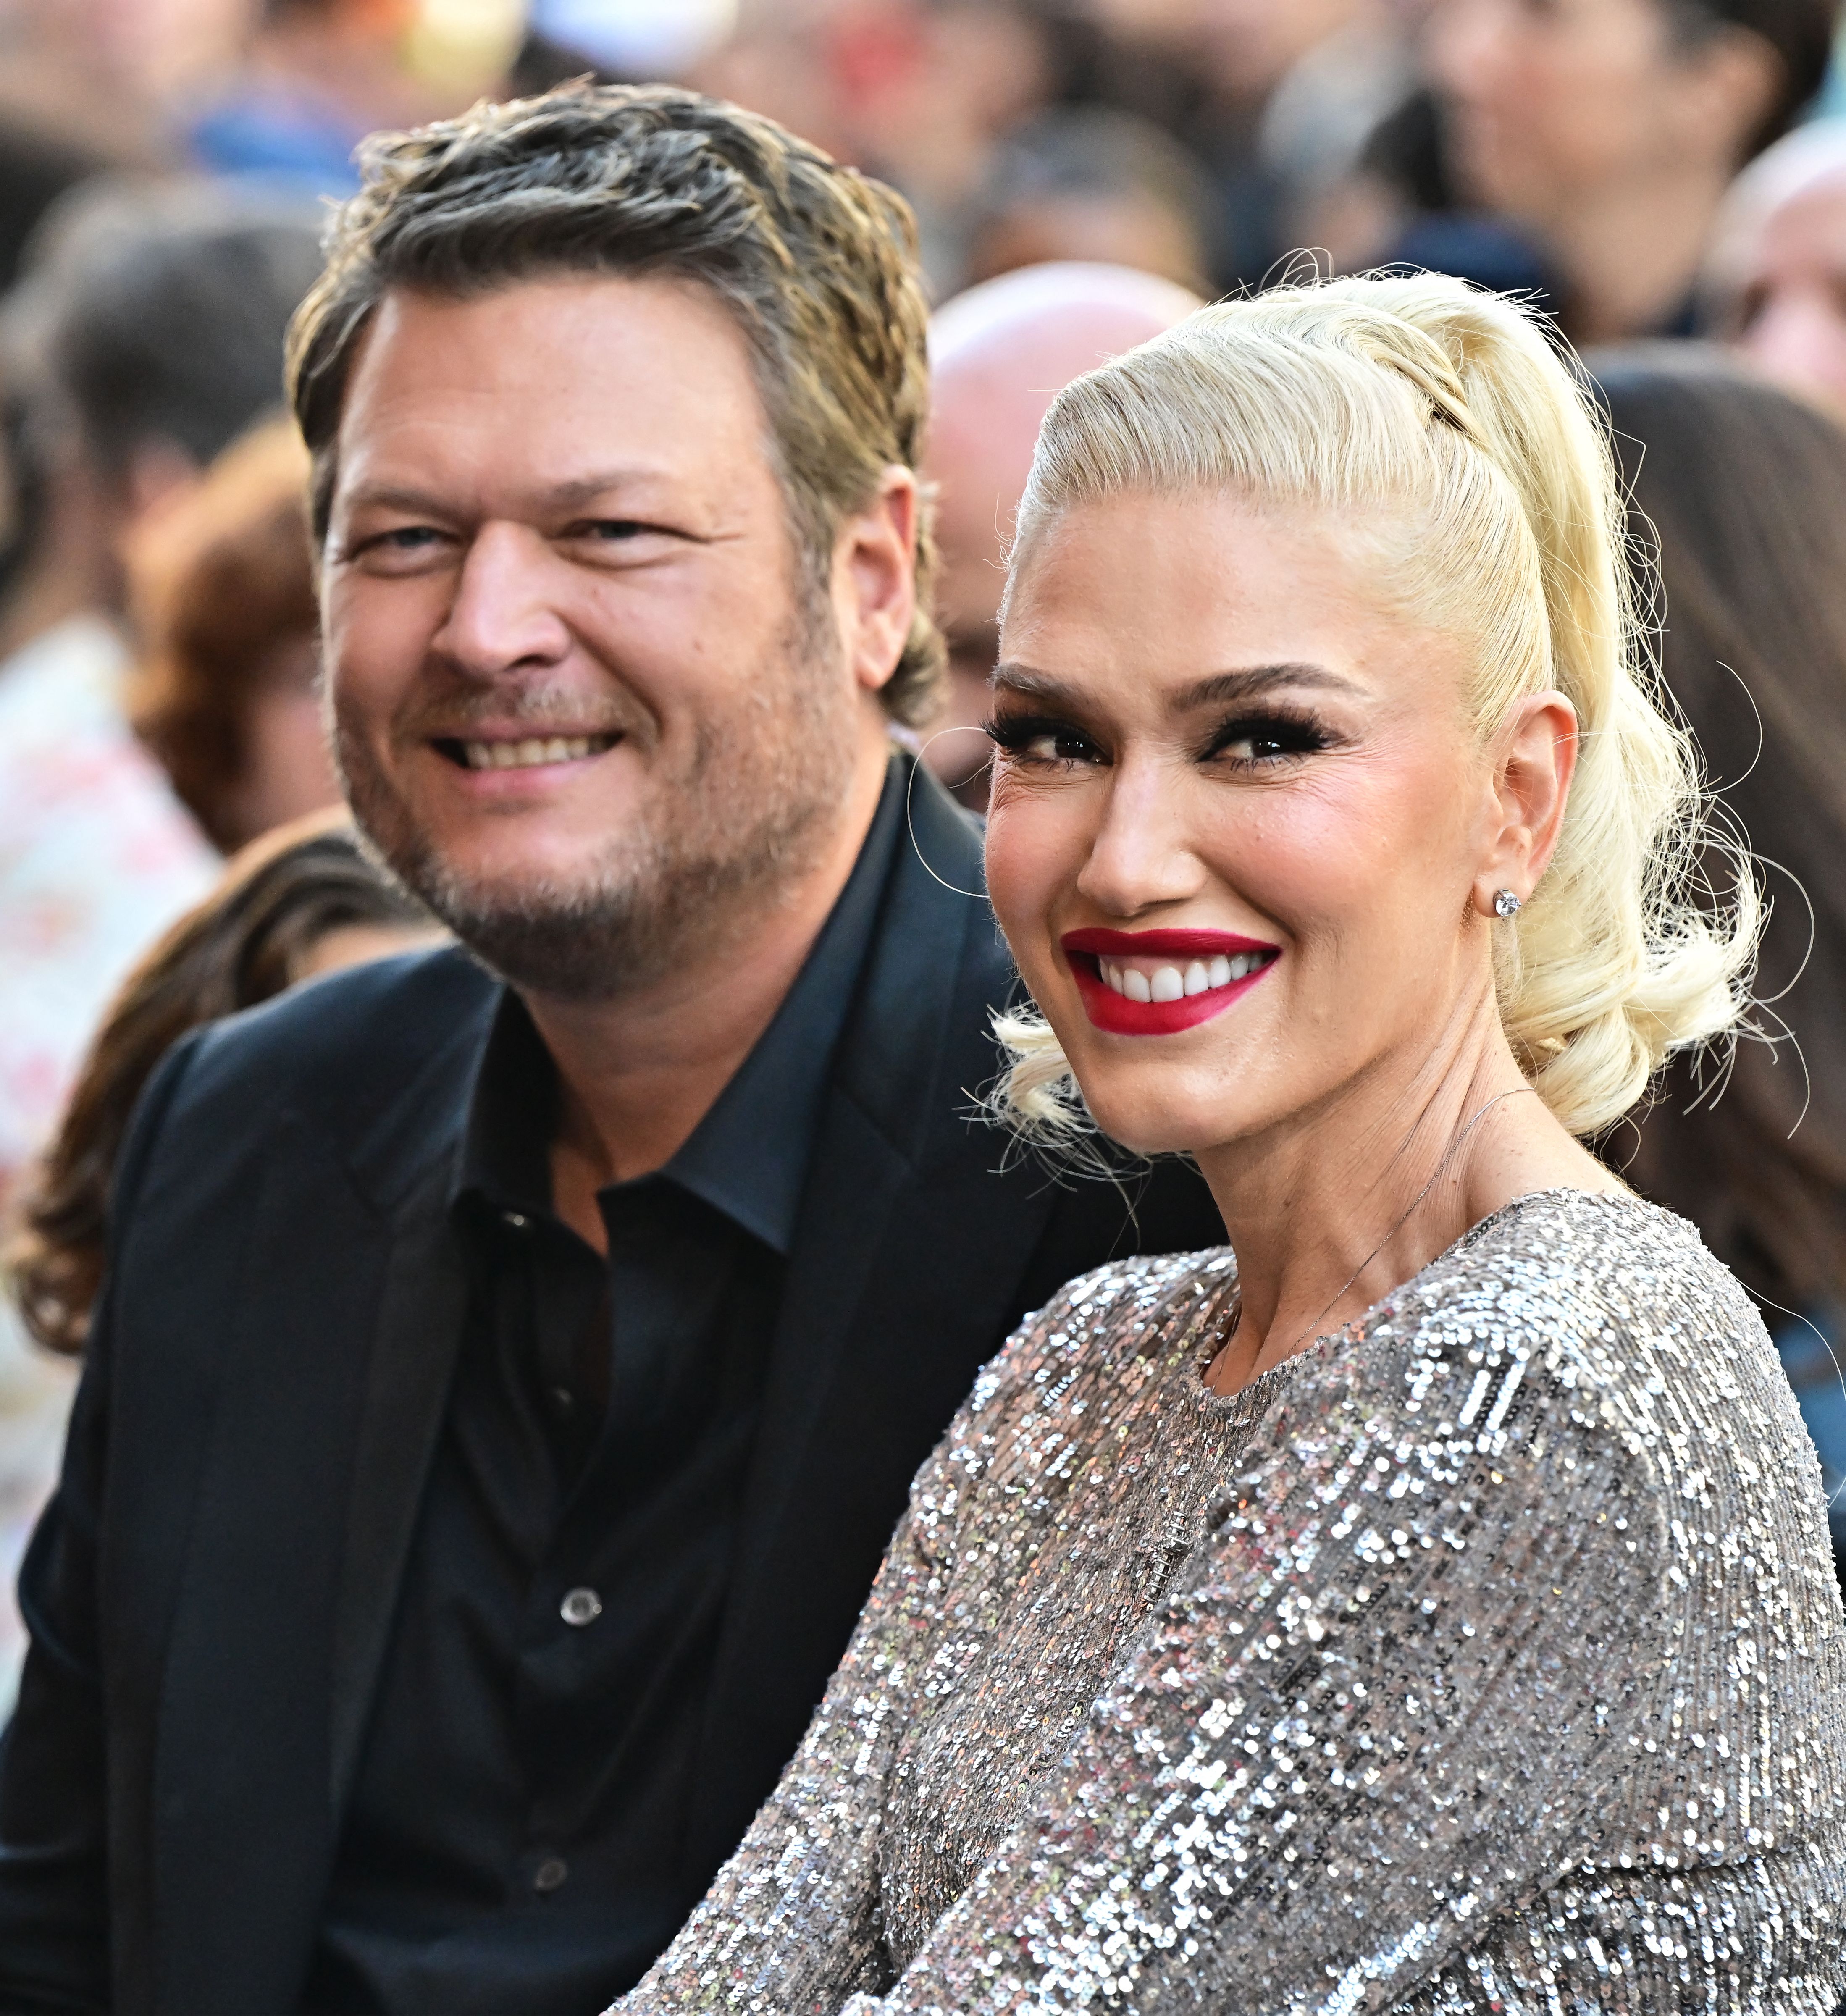 Blake and Gwen pictured at an event in October 2023